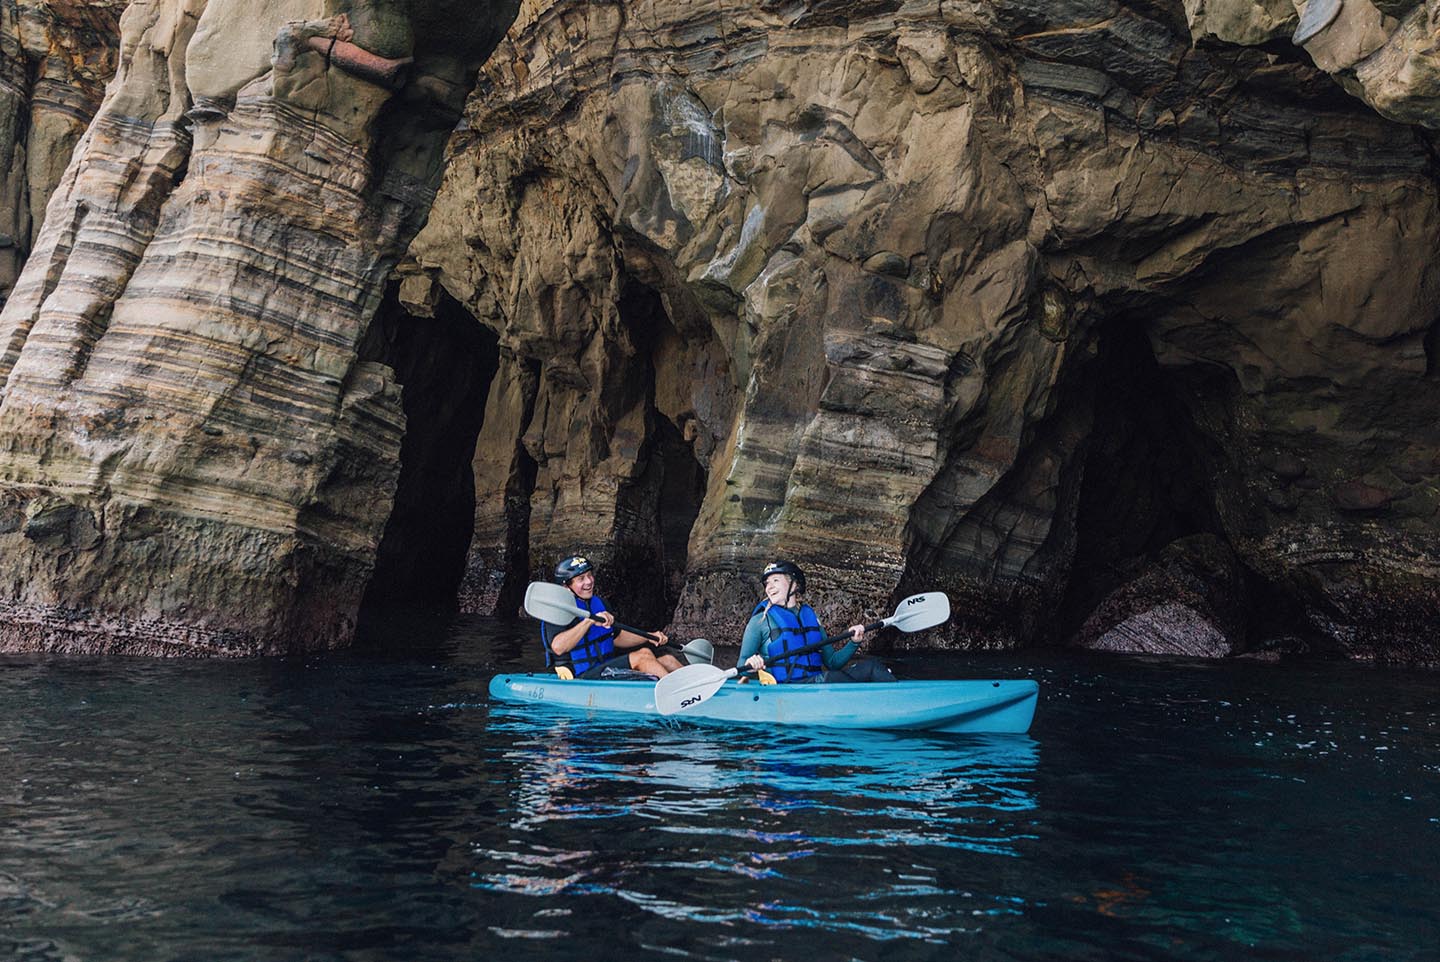 Two kayakers in the same kayak on a sea cave kayak tour with Everyday California, paddling alongside towering sea cave cliffs. The ocean is calm, there are no waves.